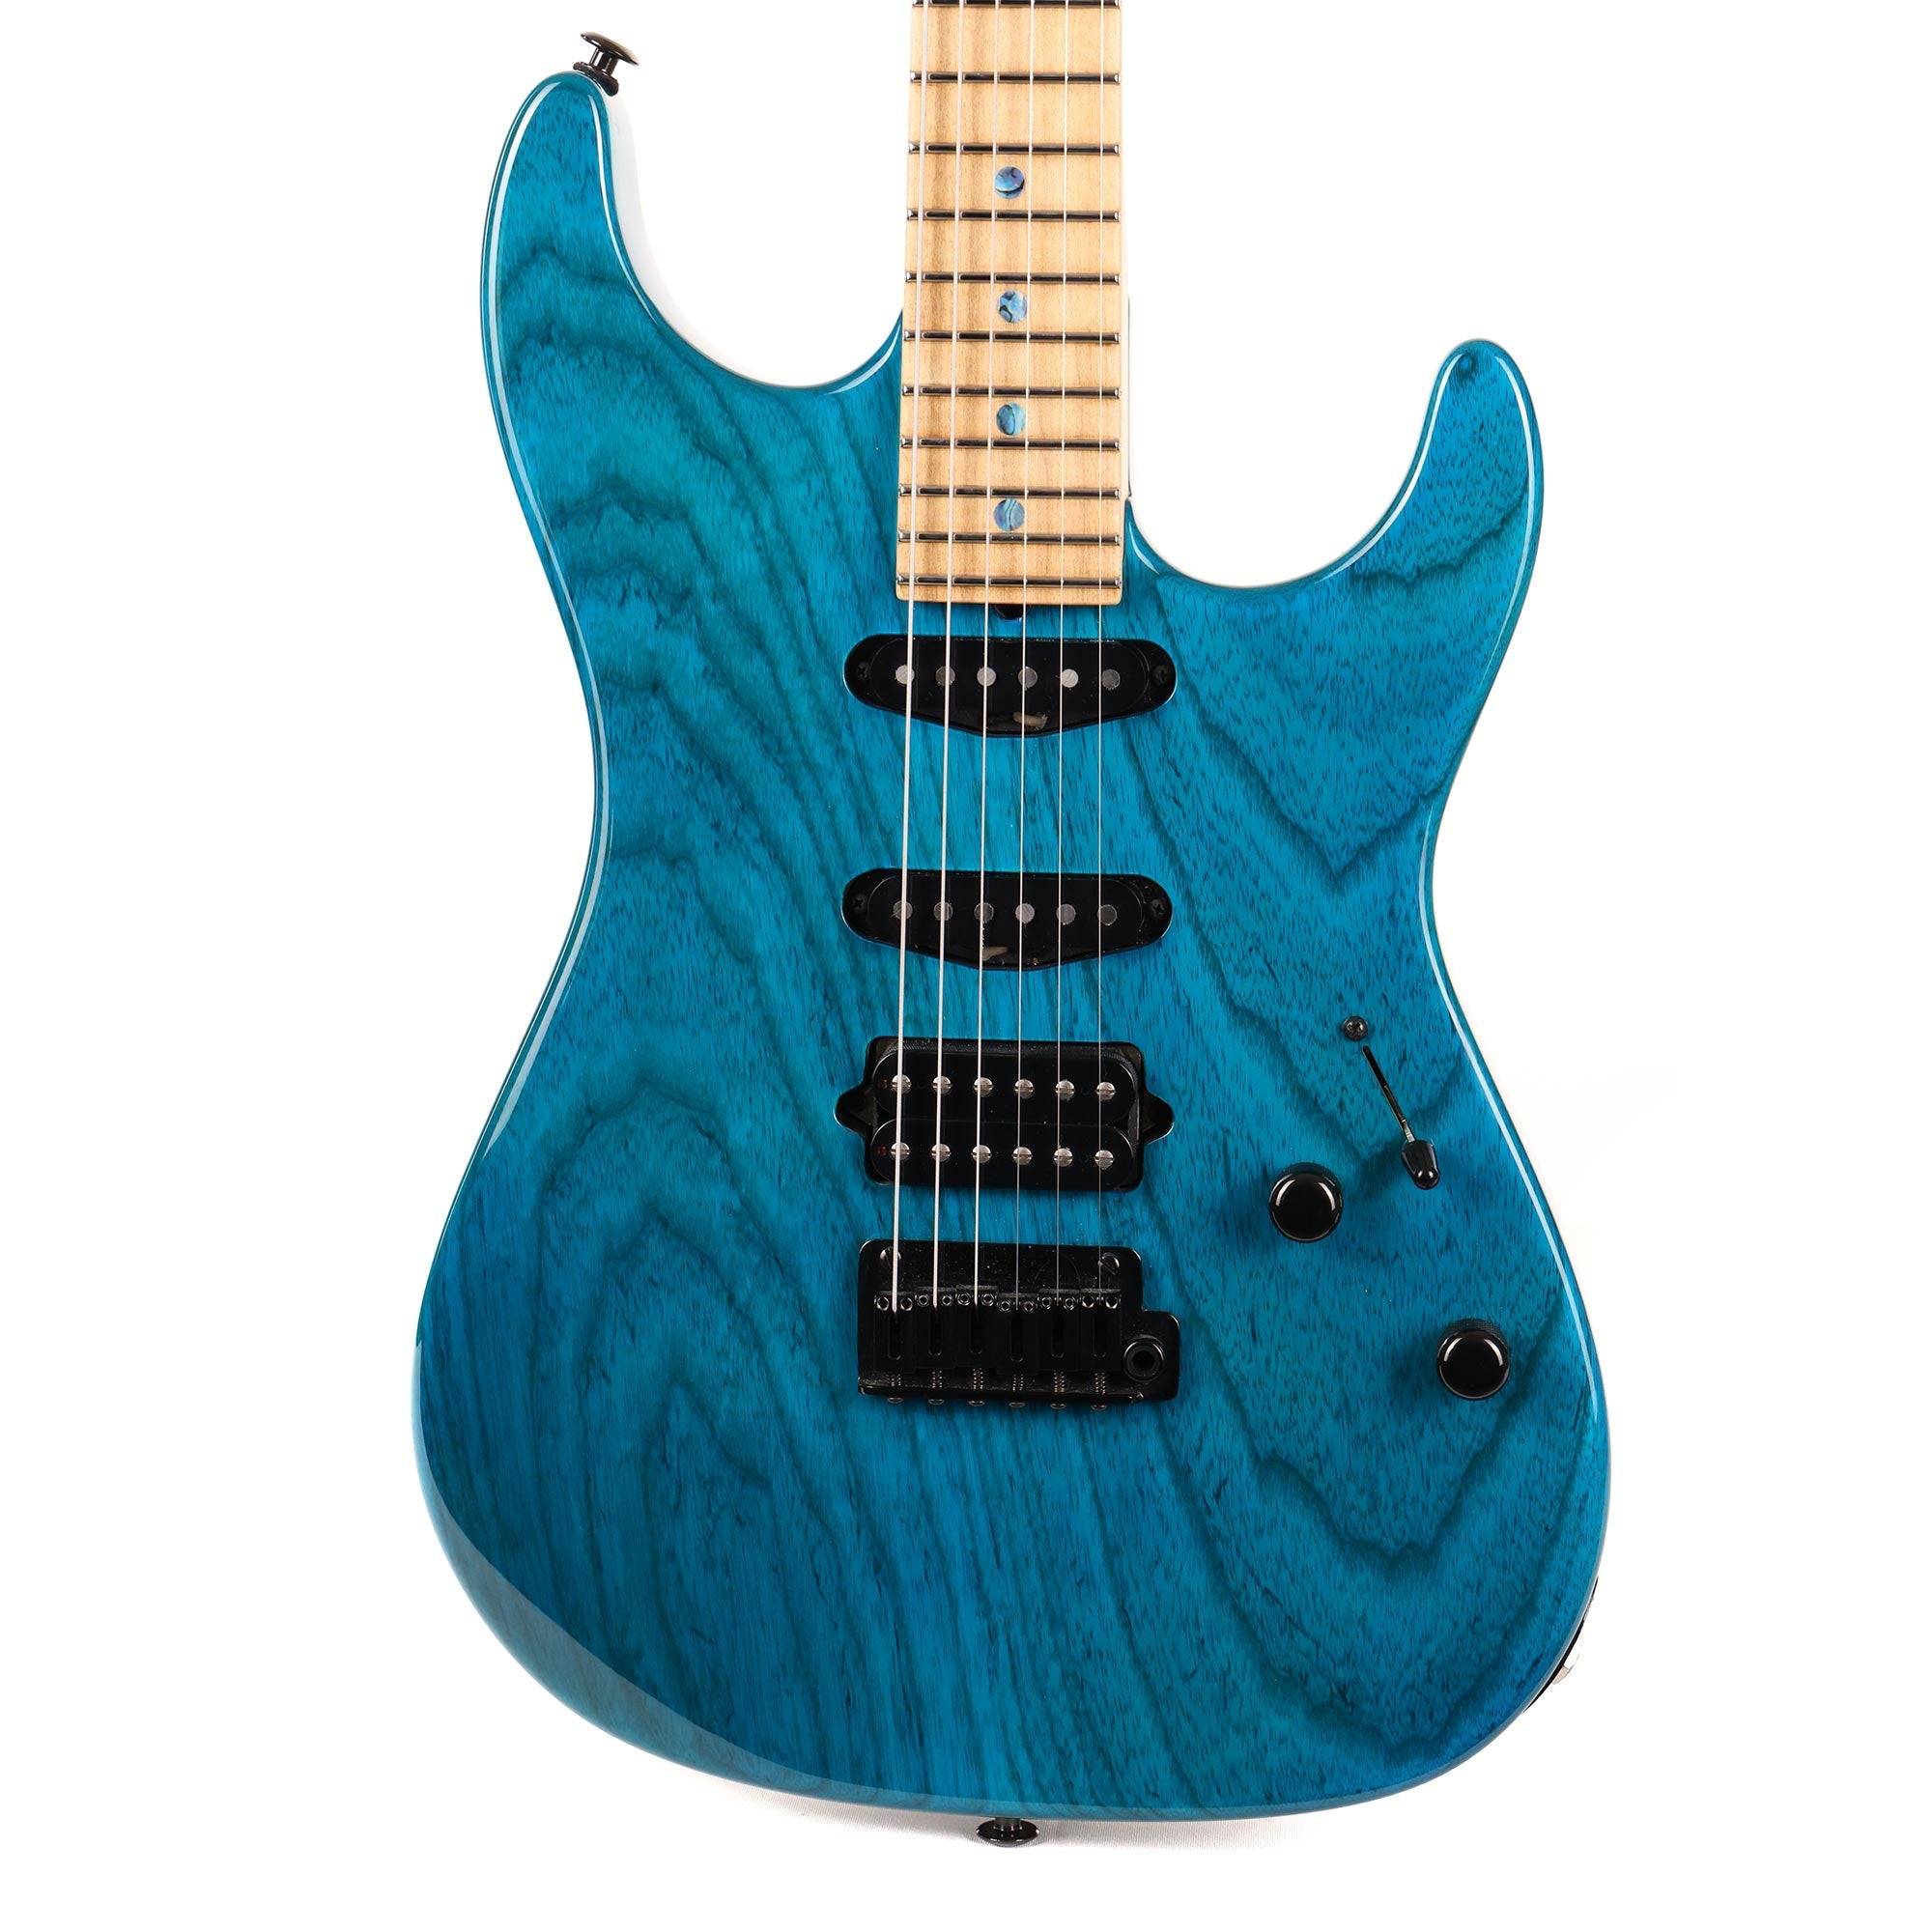 Suhr Standard Trans Teal 2007 | The Music Zoo